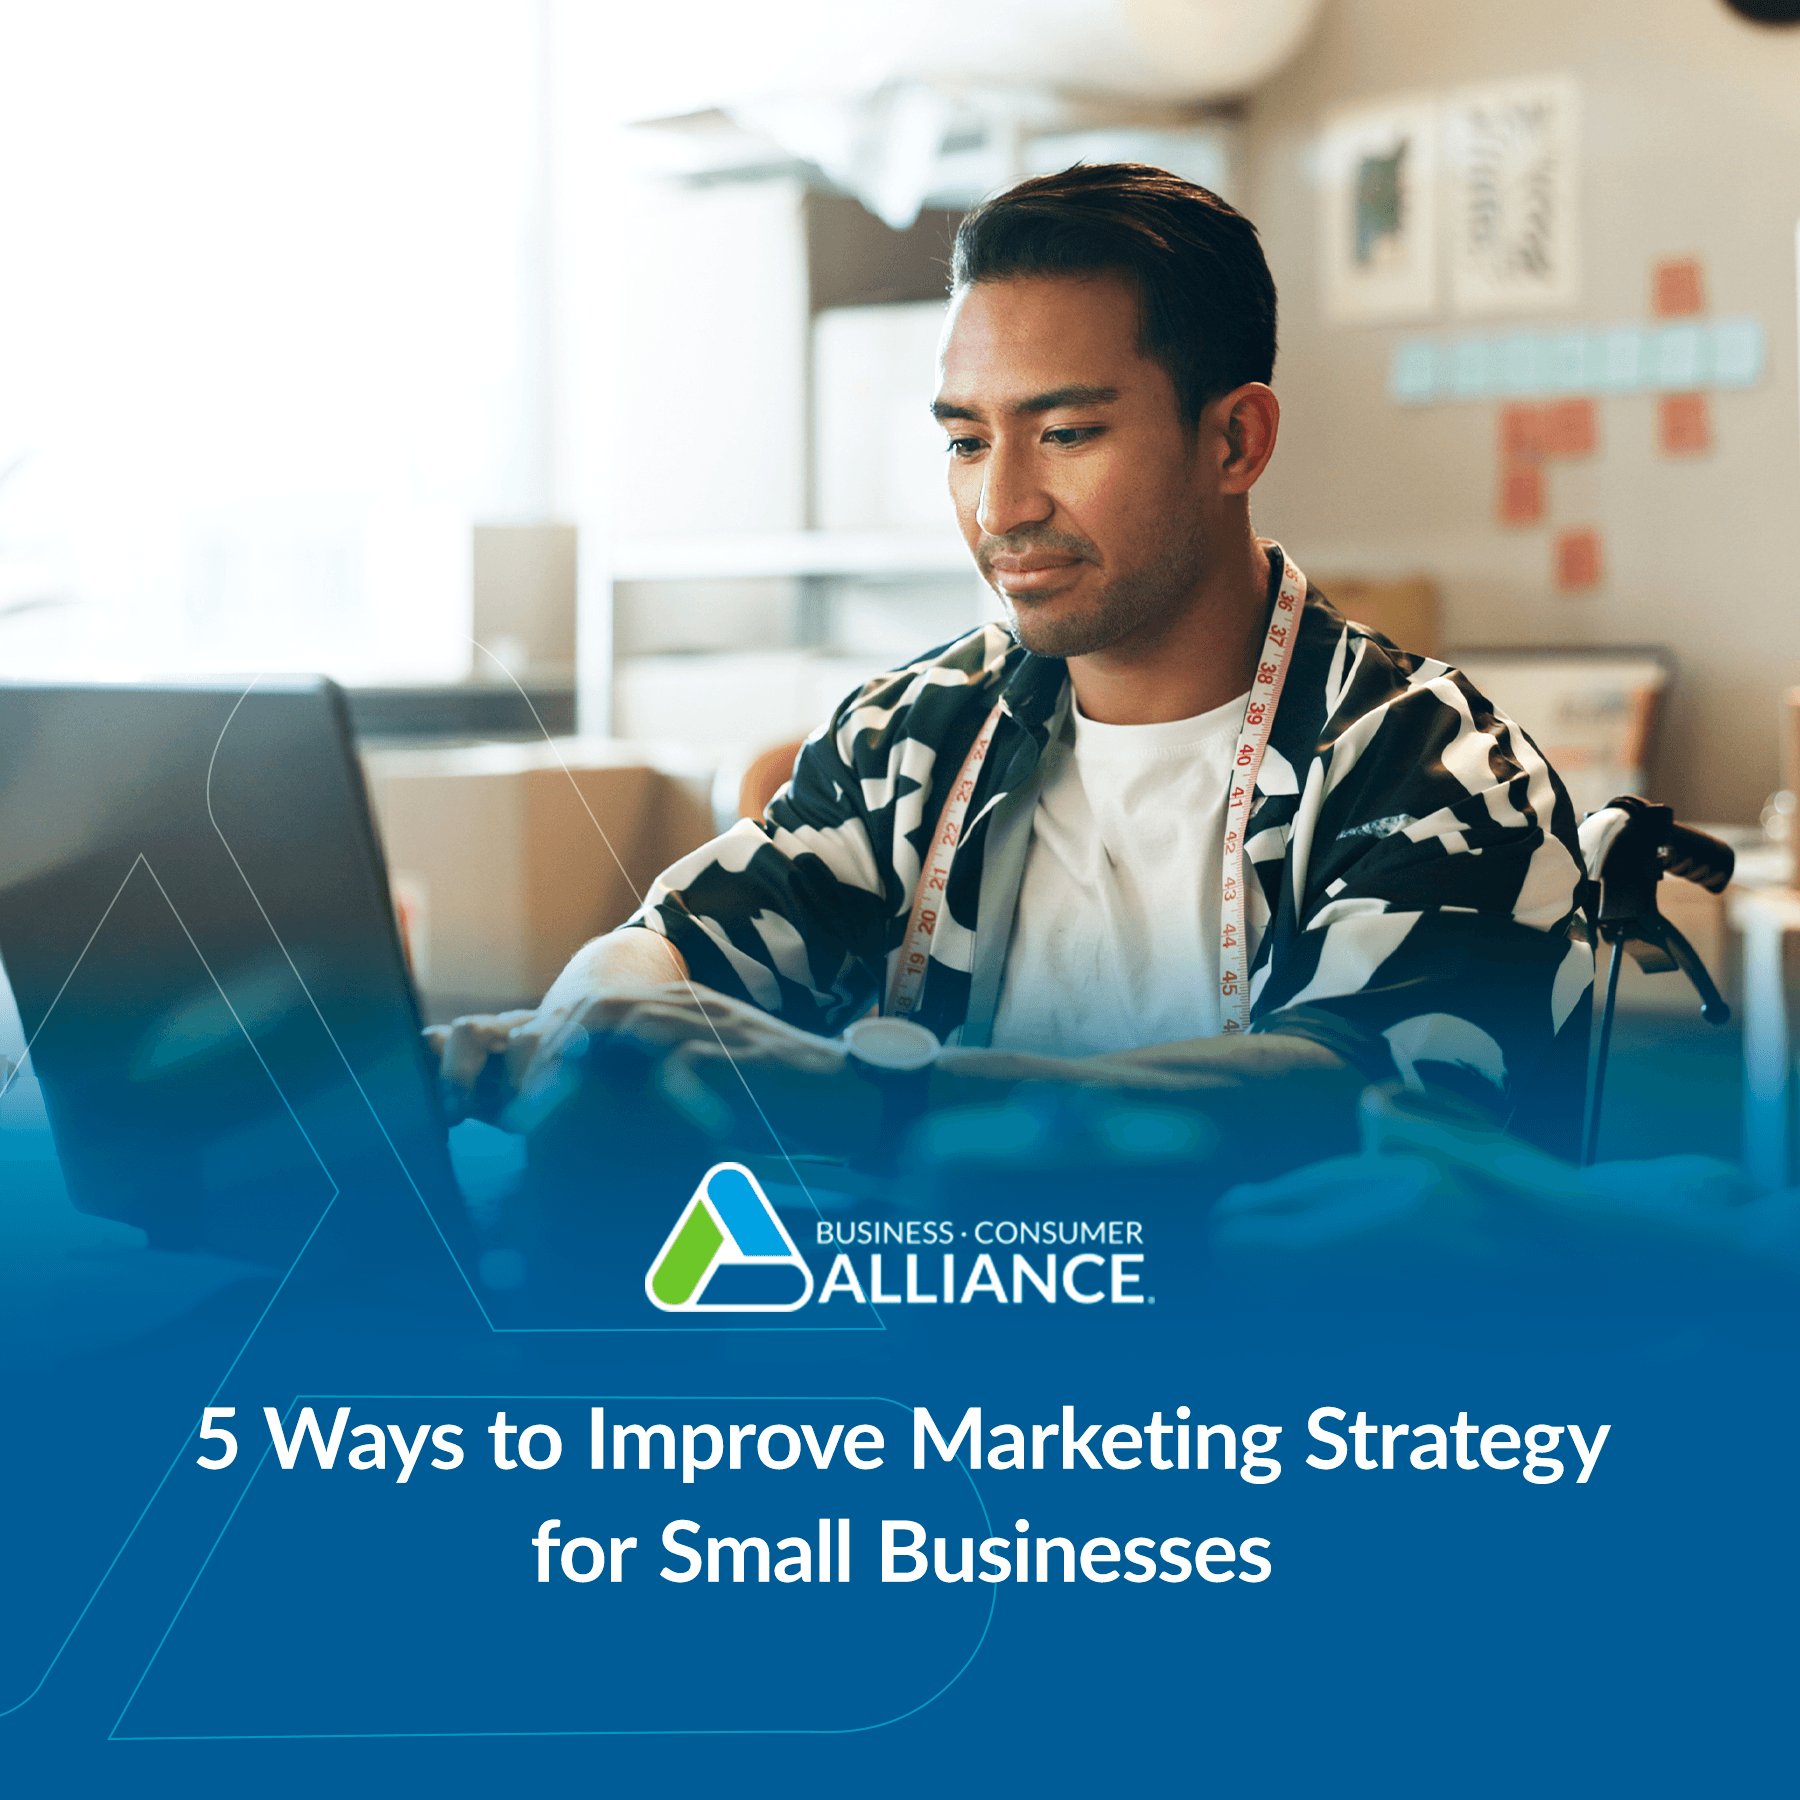 5 Ways to Improve Marketing Strategy for Small Businesses